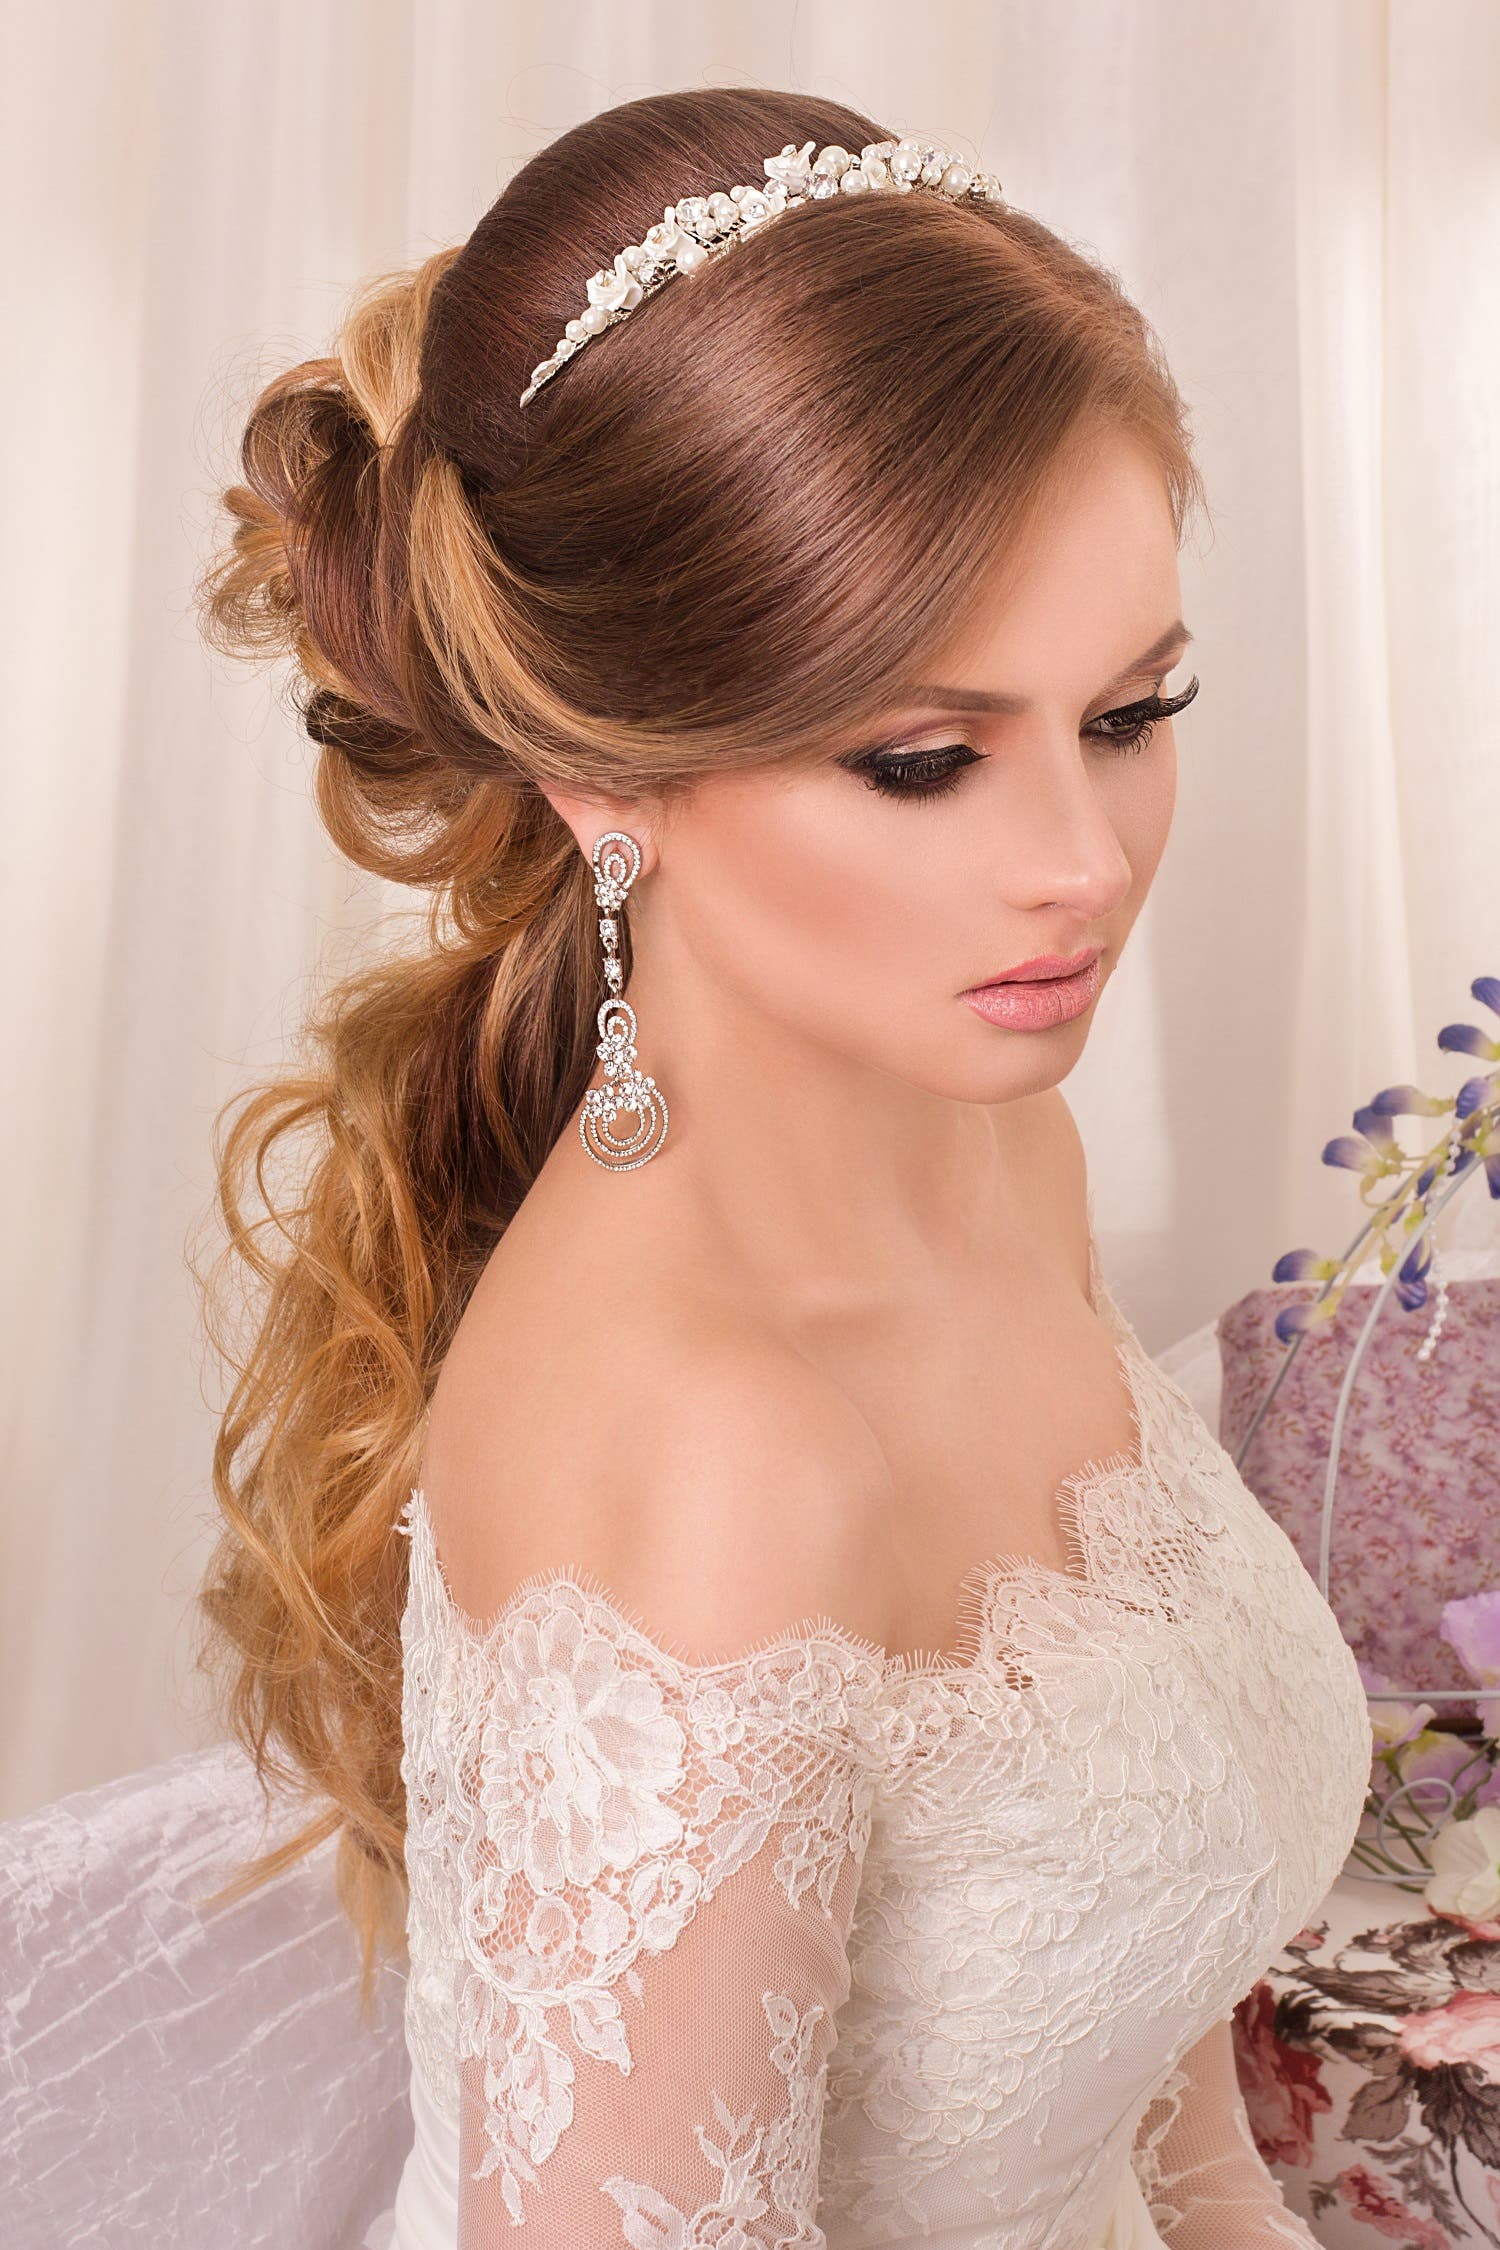 Hairstyles To Wear To A Wedding
 Choosing the perfect hairstyle to match your wedding dress